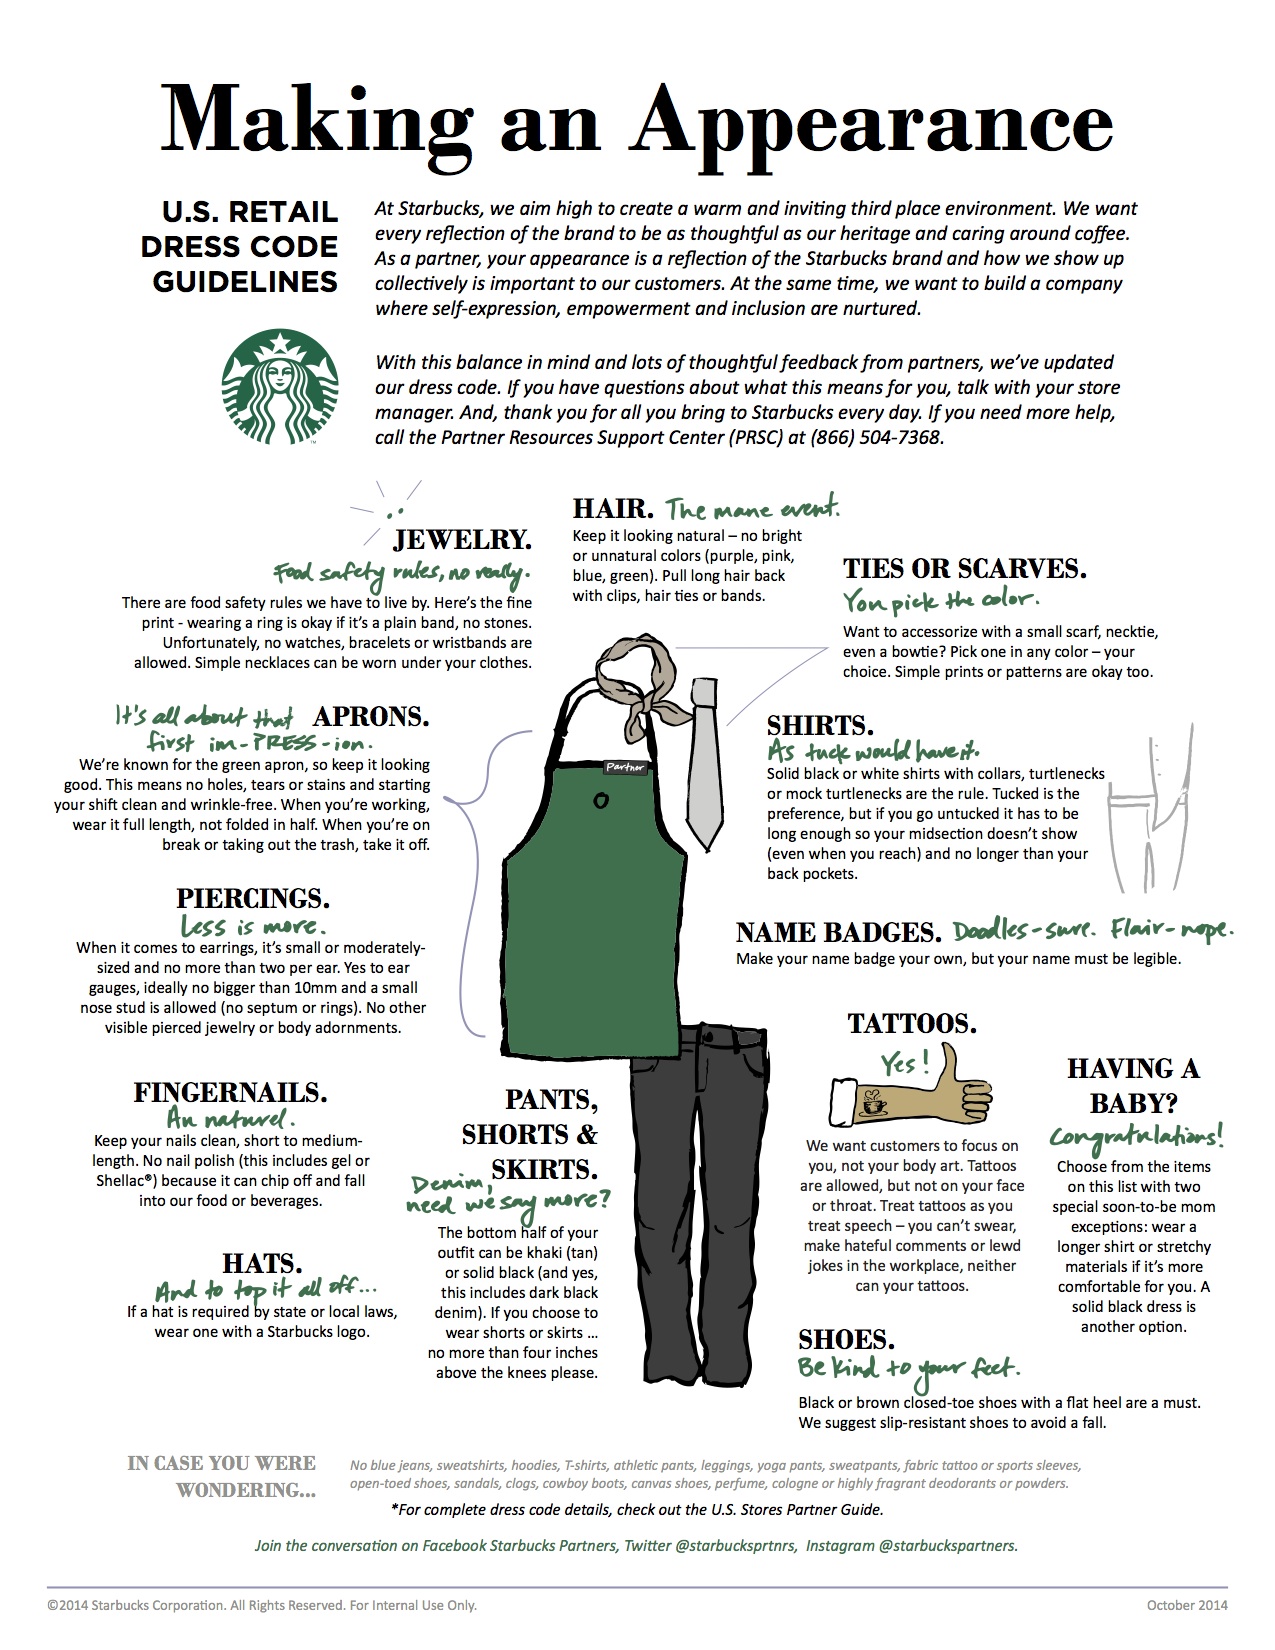 Starbucks' dress code policy. [Click to enlarge]